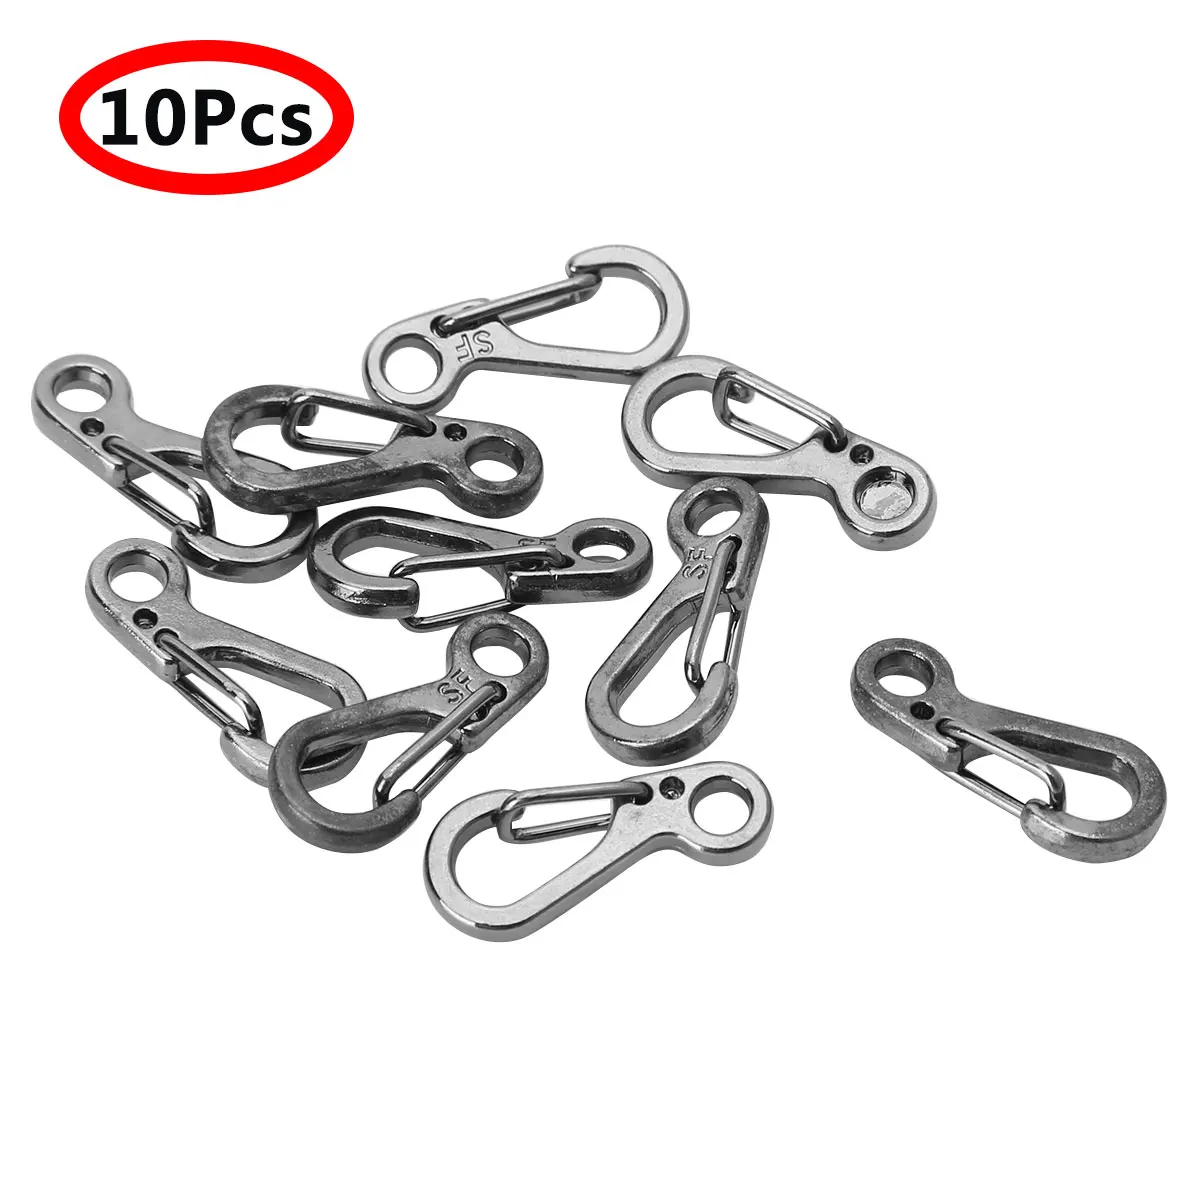 10 Pieces S Shape Metal Buckle Dual Spring Keychain Clip 2 Opening Snap Hook Durable Clip Key Chain Hook for Outdoor Activity Camping Fishing Hiking Traveling